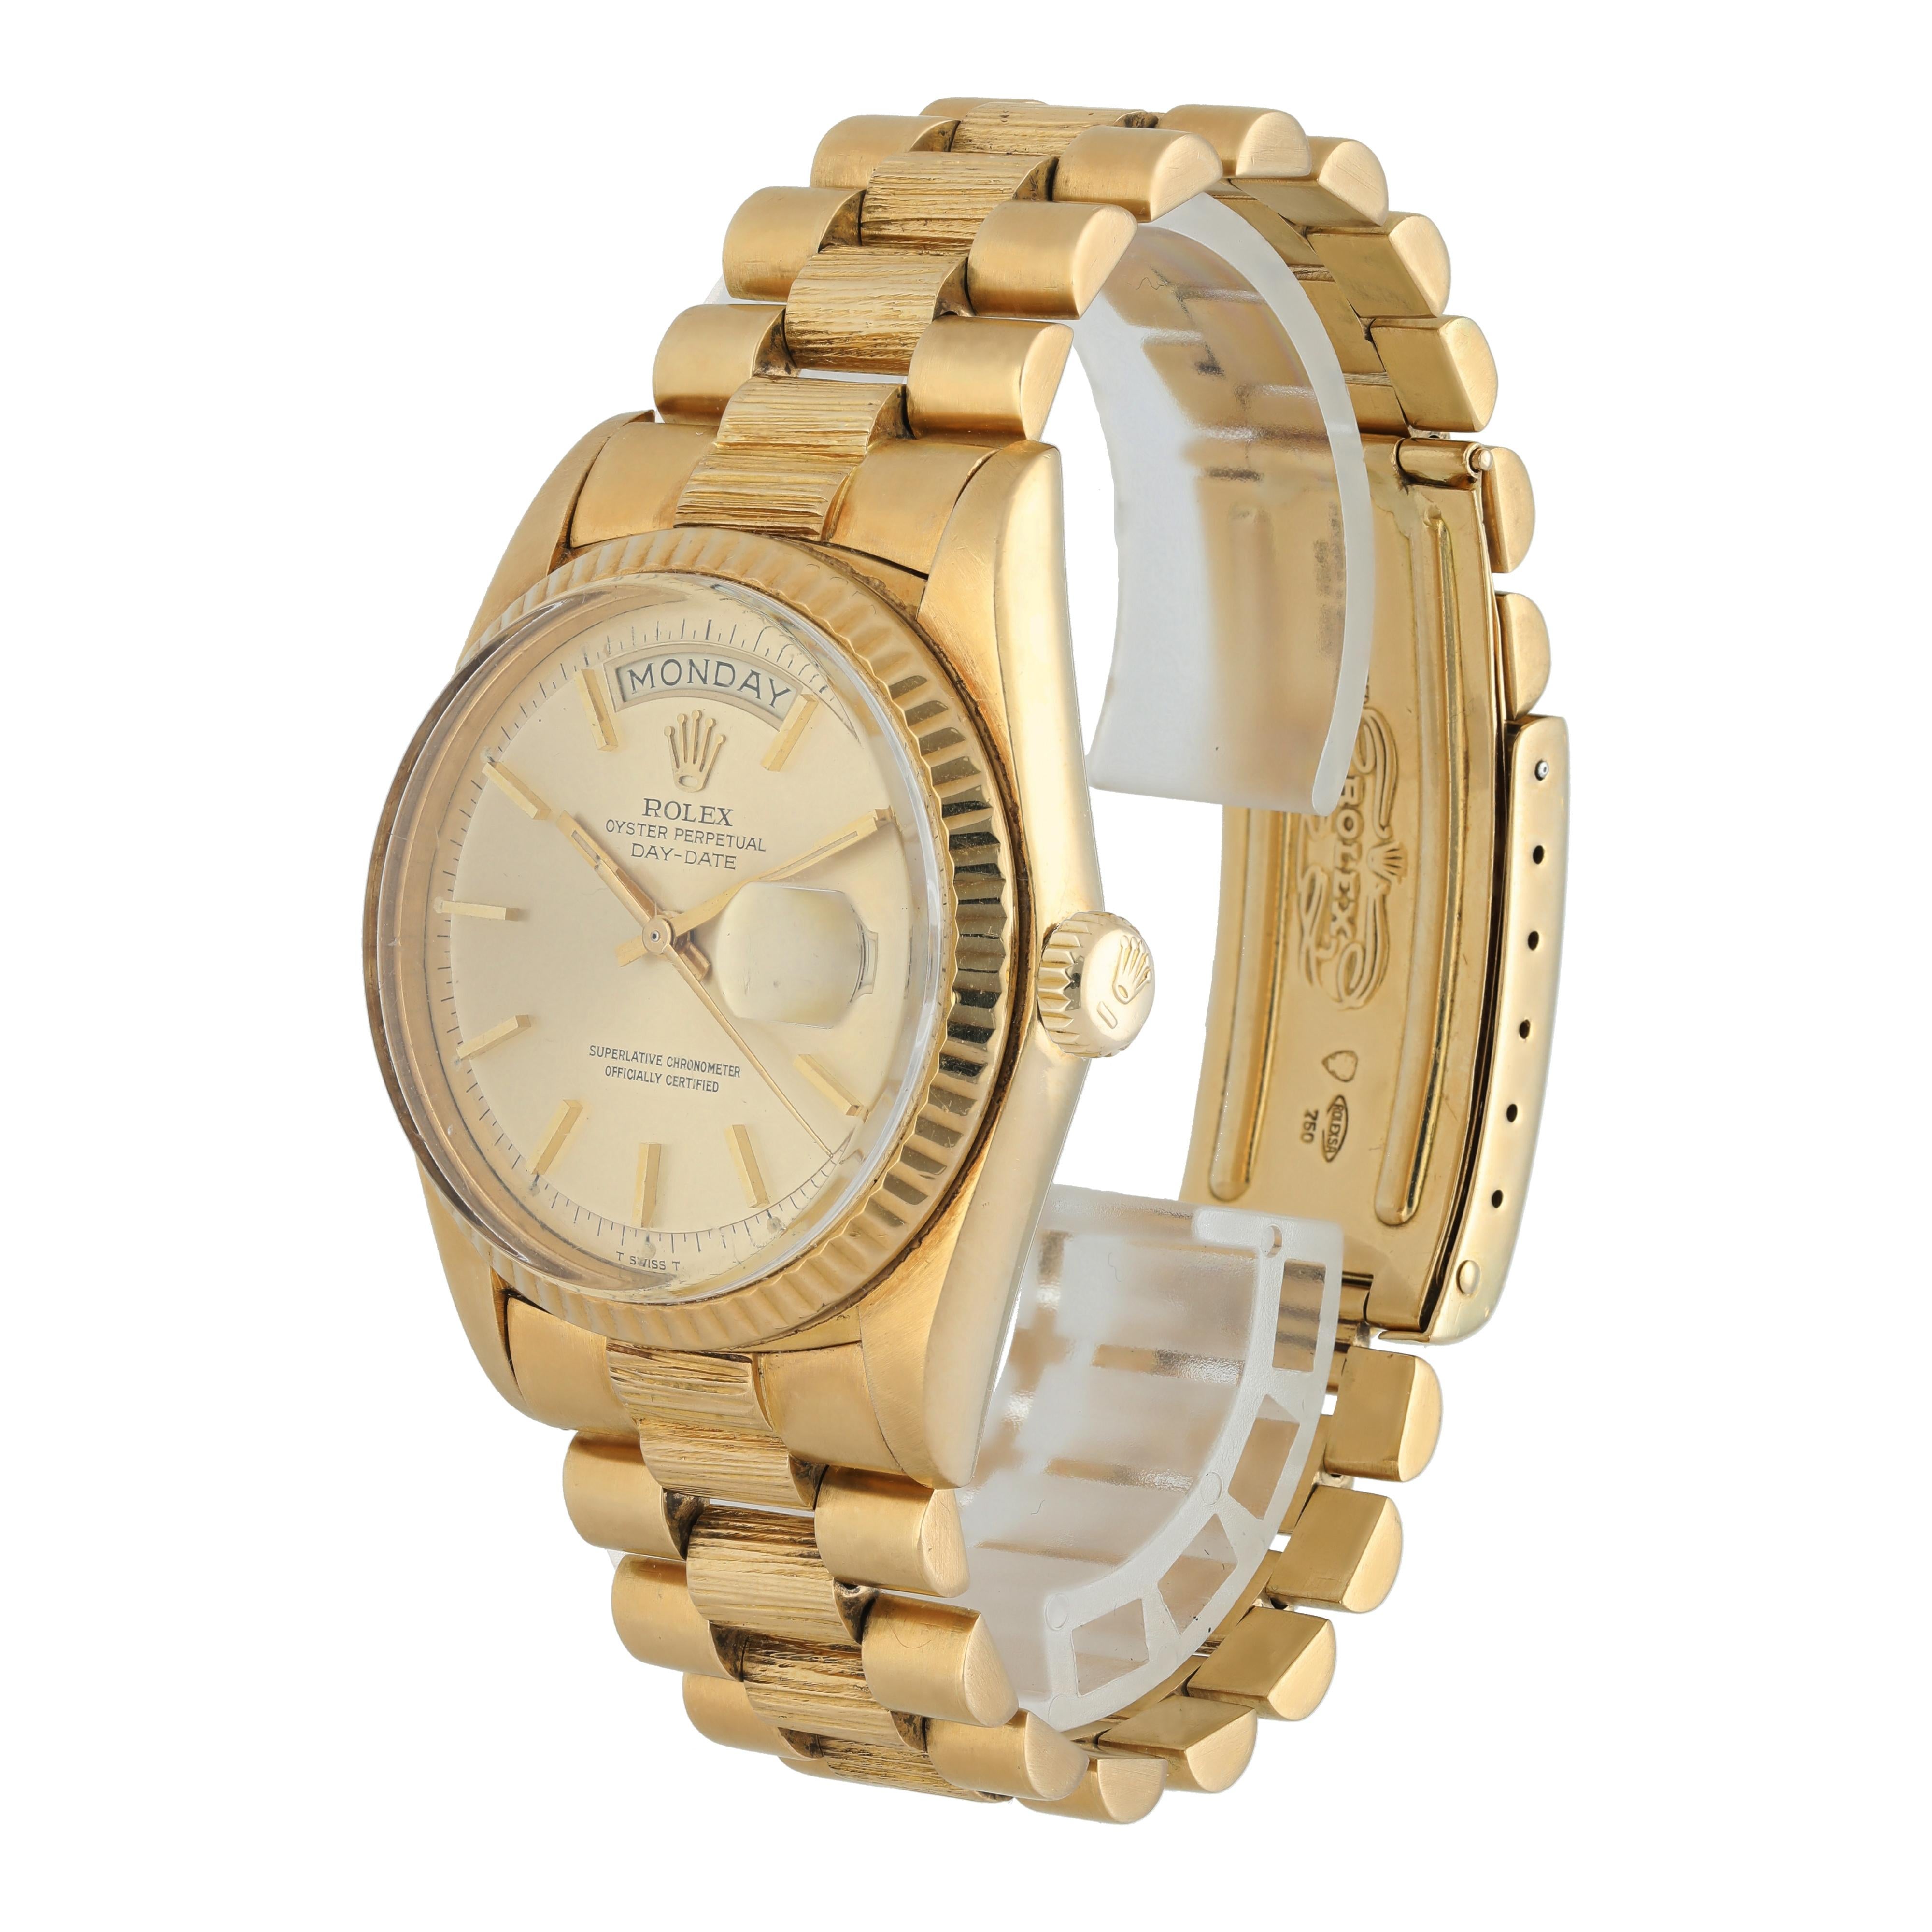 Rolex Day Date 18078 President Men's Watch. 
36mm 18k Yellow Gold case. 
Yellow Gold Stationary bezel. 
Gold dial with gold hands and index hour markers. 
Minute markers on the outer dial. 
Date display at the 3 o'clock position. 
Yellow Gold